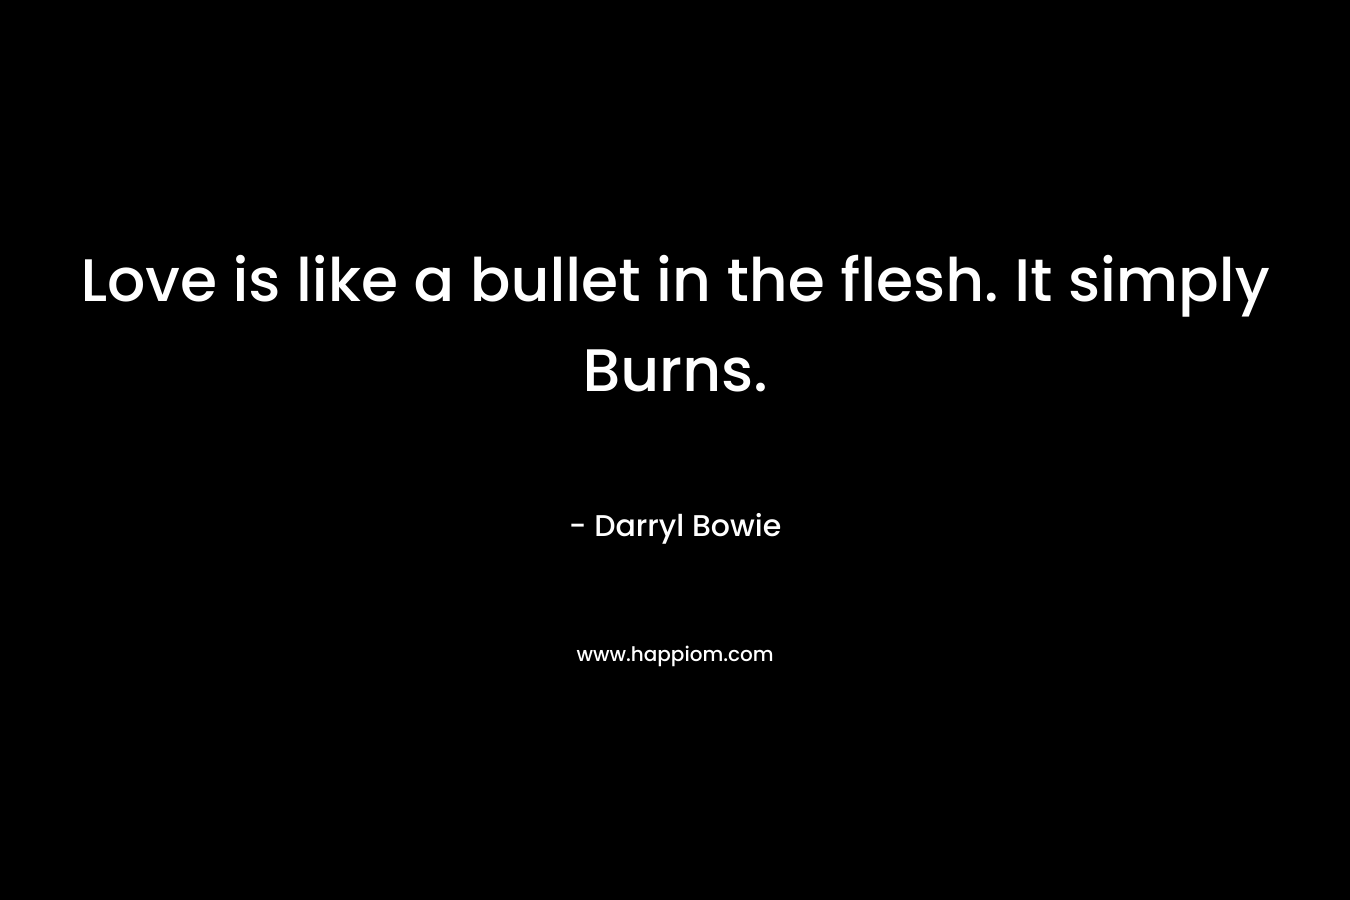 Love is like a bullet in the flesh. It simply Burns.